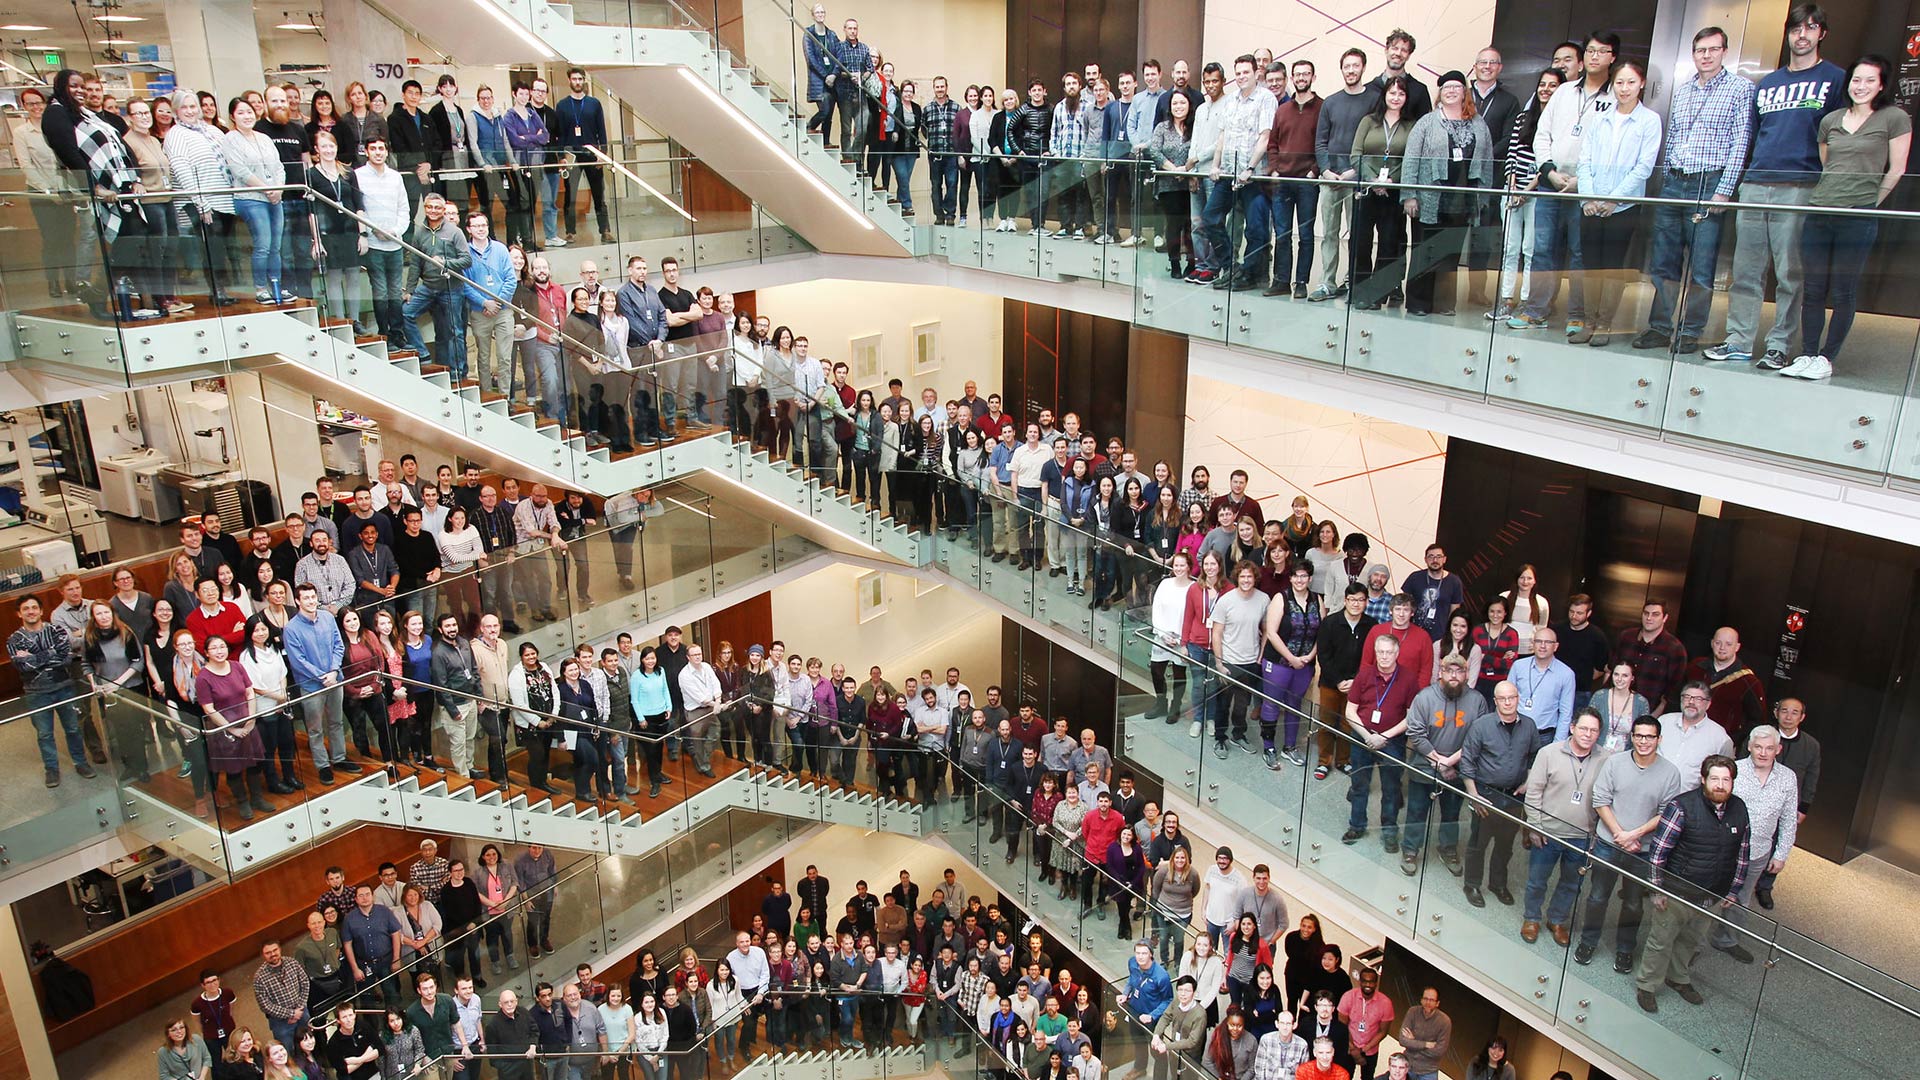 Hundreds of men and women standing in the halls and staircases of the Allen Institute posing for an all-staff photo